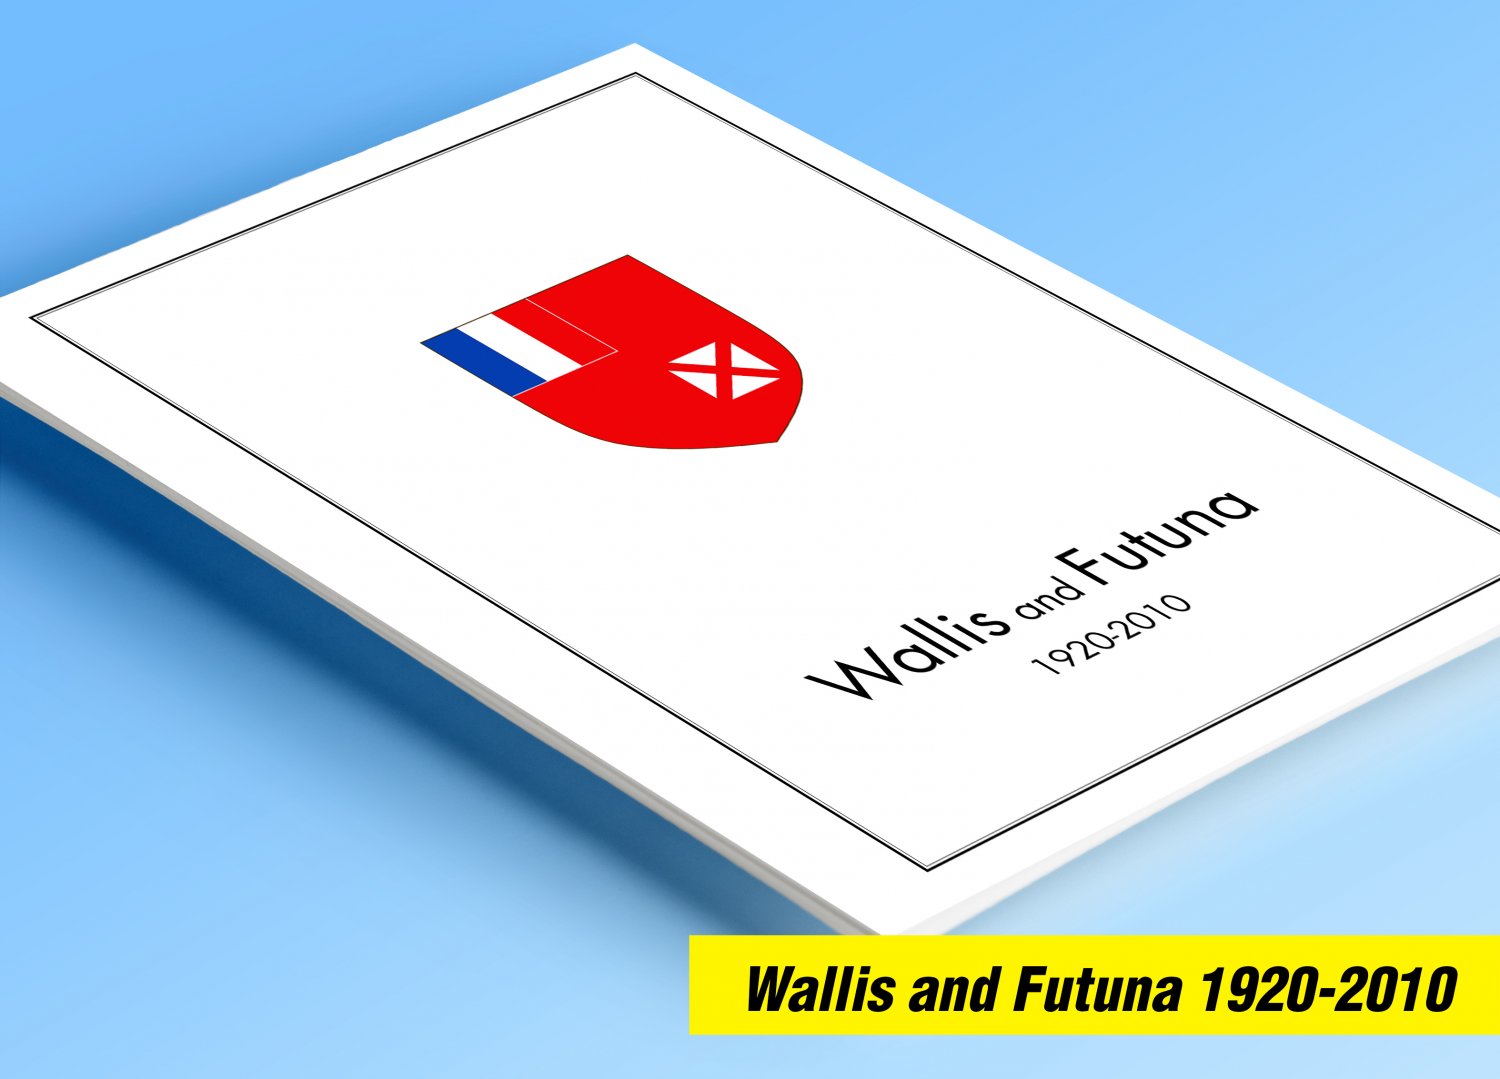 COLOR PRINTED WALLIS & FUTUNA 1920-2010 STAMP ALBUM PAGES (131 illustrated pages)